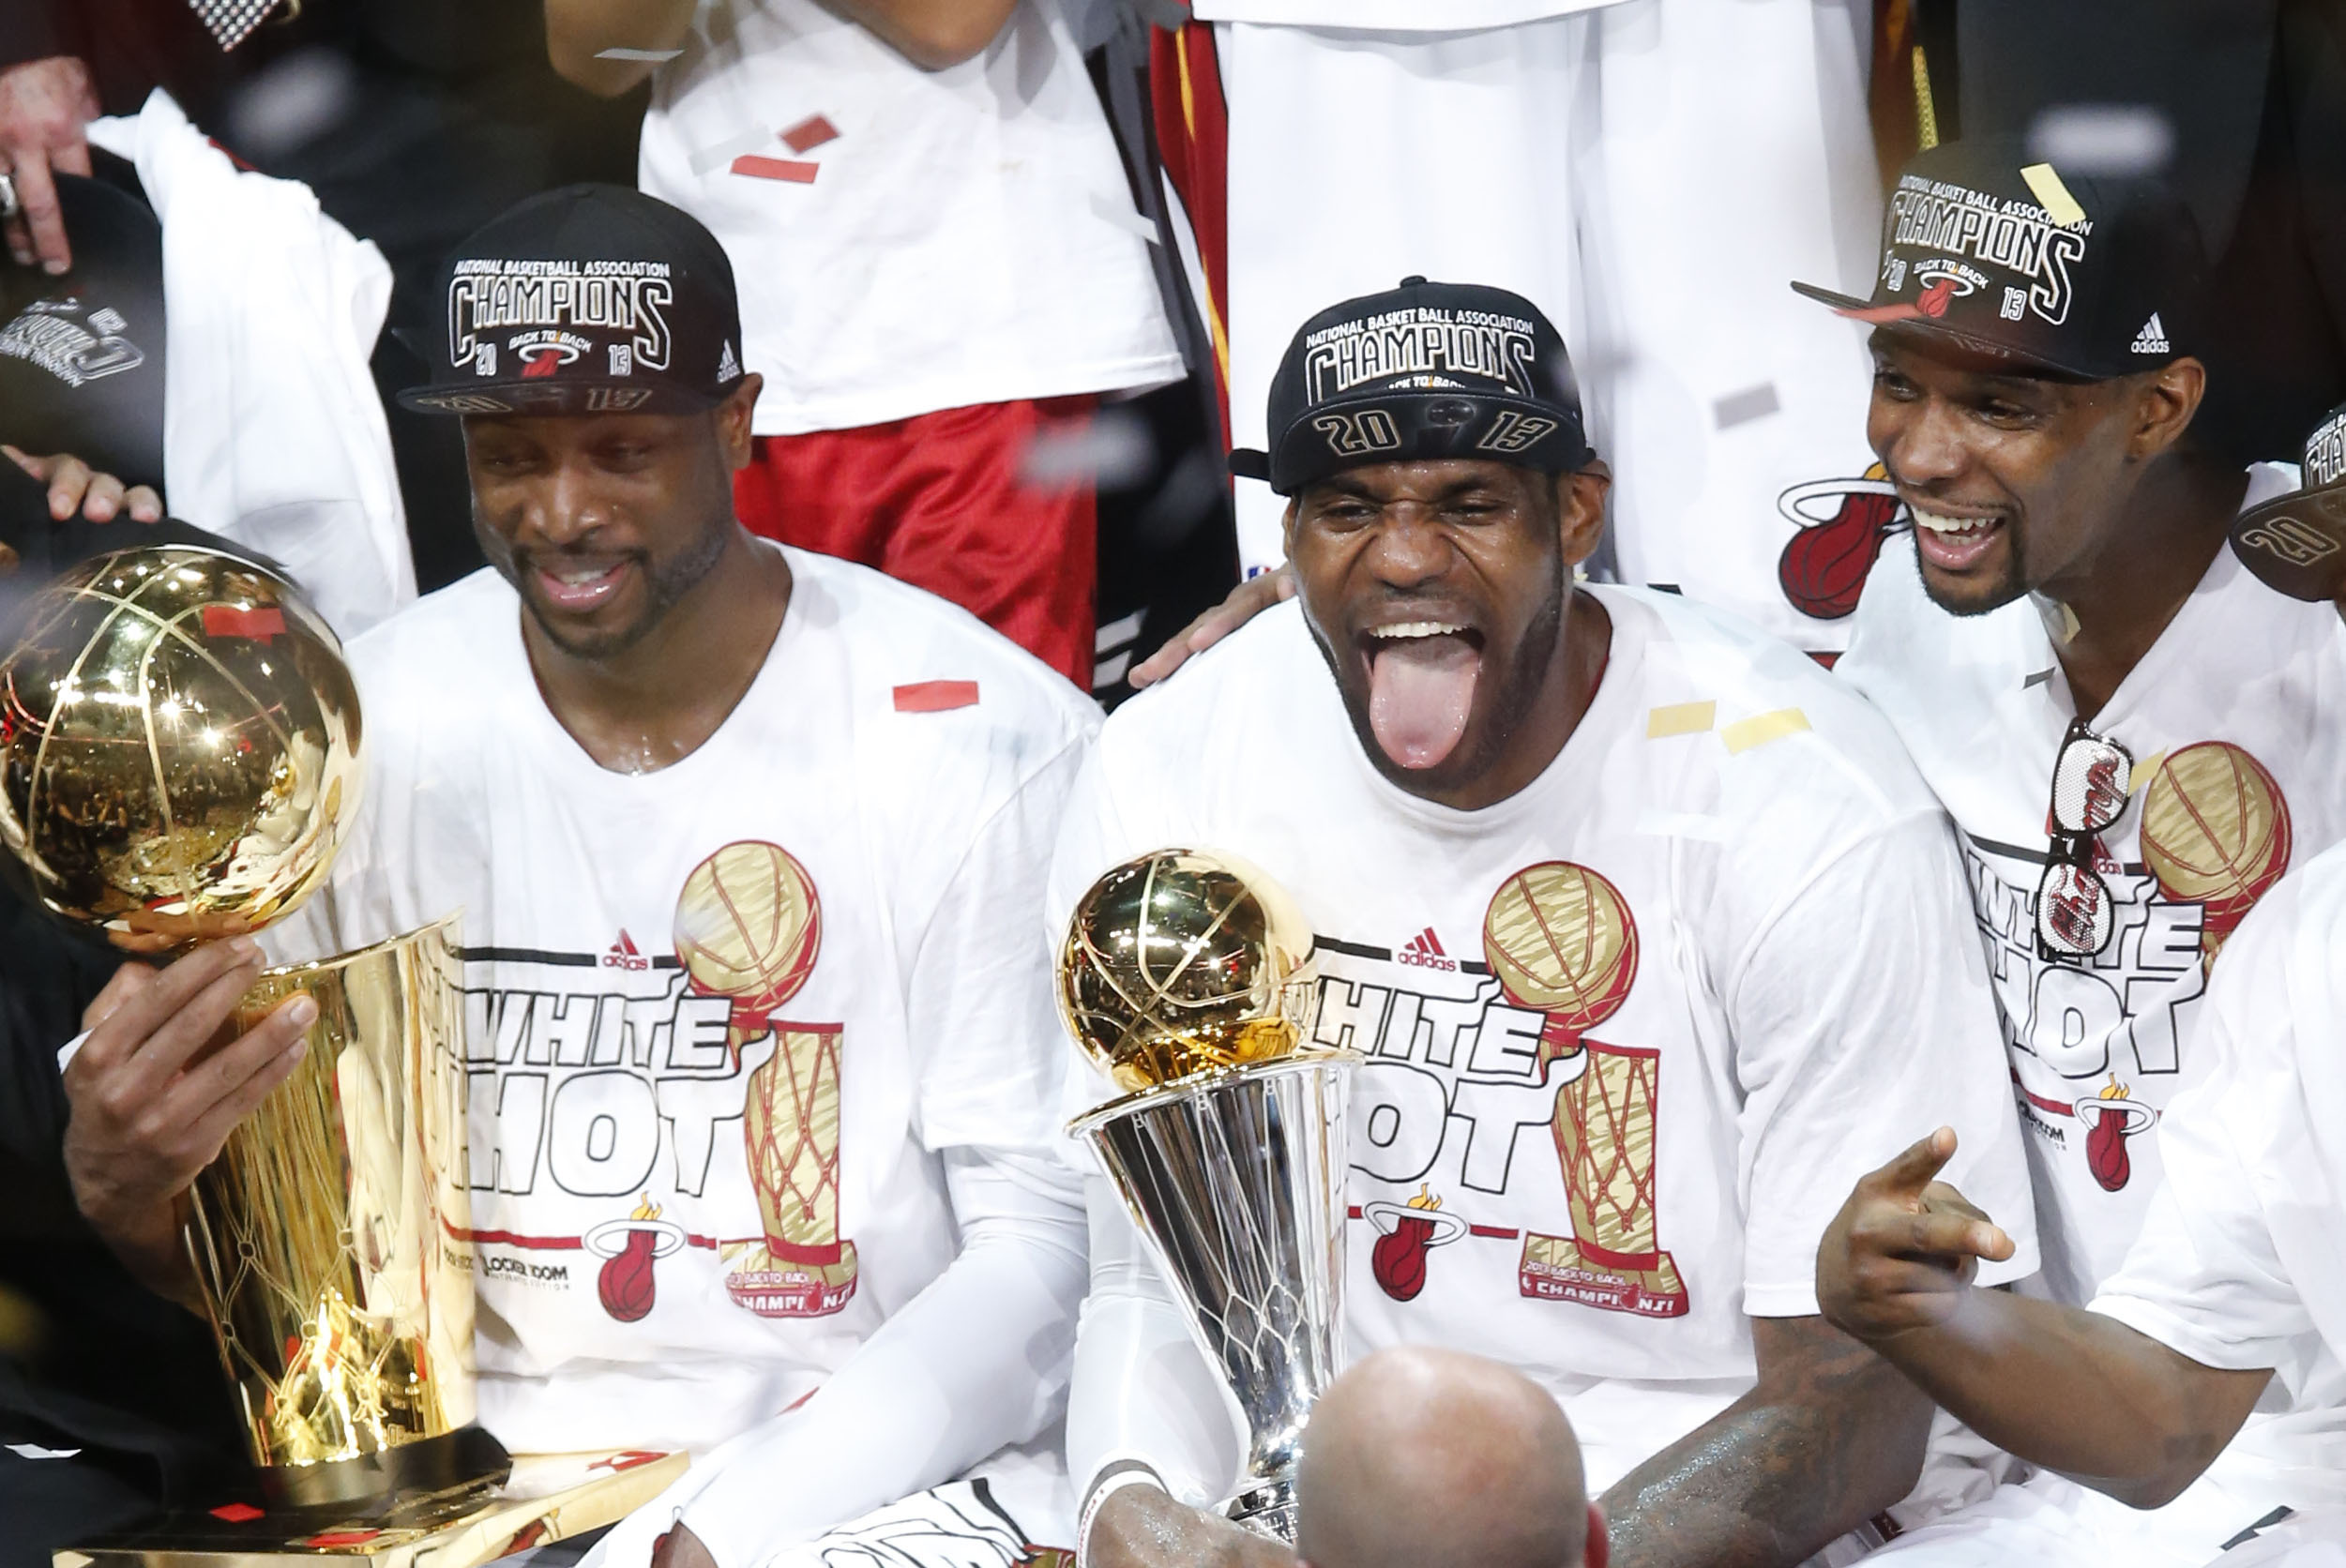 LeBron James and Miami Heat favorites to win NBA championship in